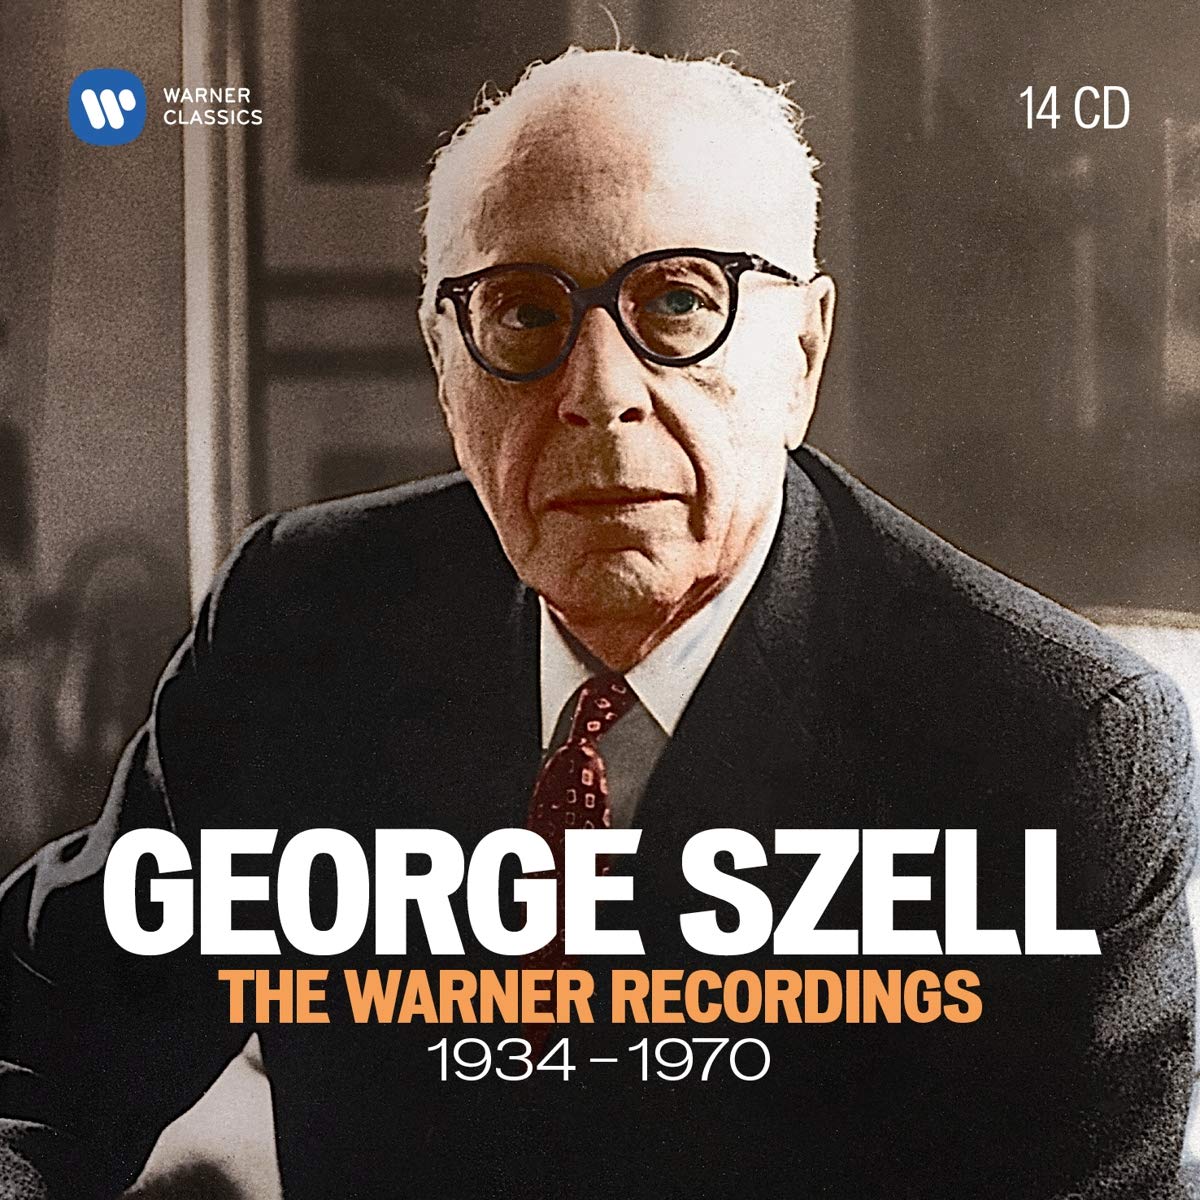 GEORGE SZELL: THE WARNER RECORDINGS 1934-1970 (14 CDS)